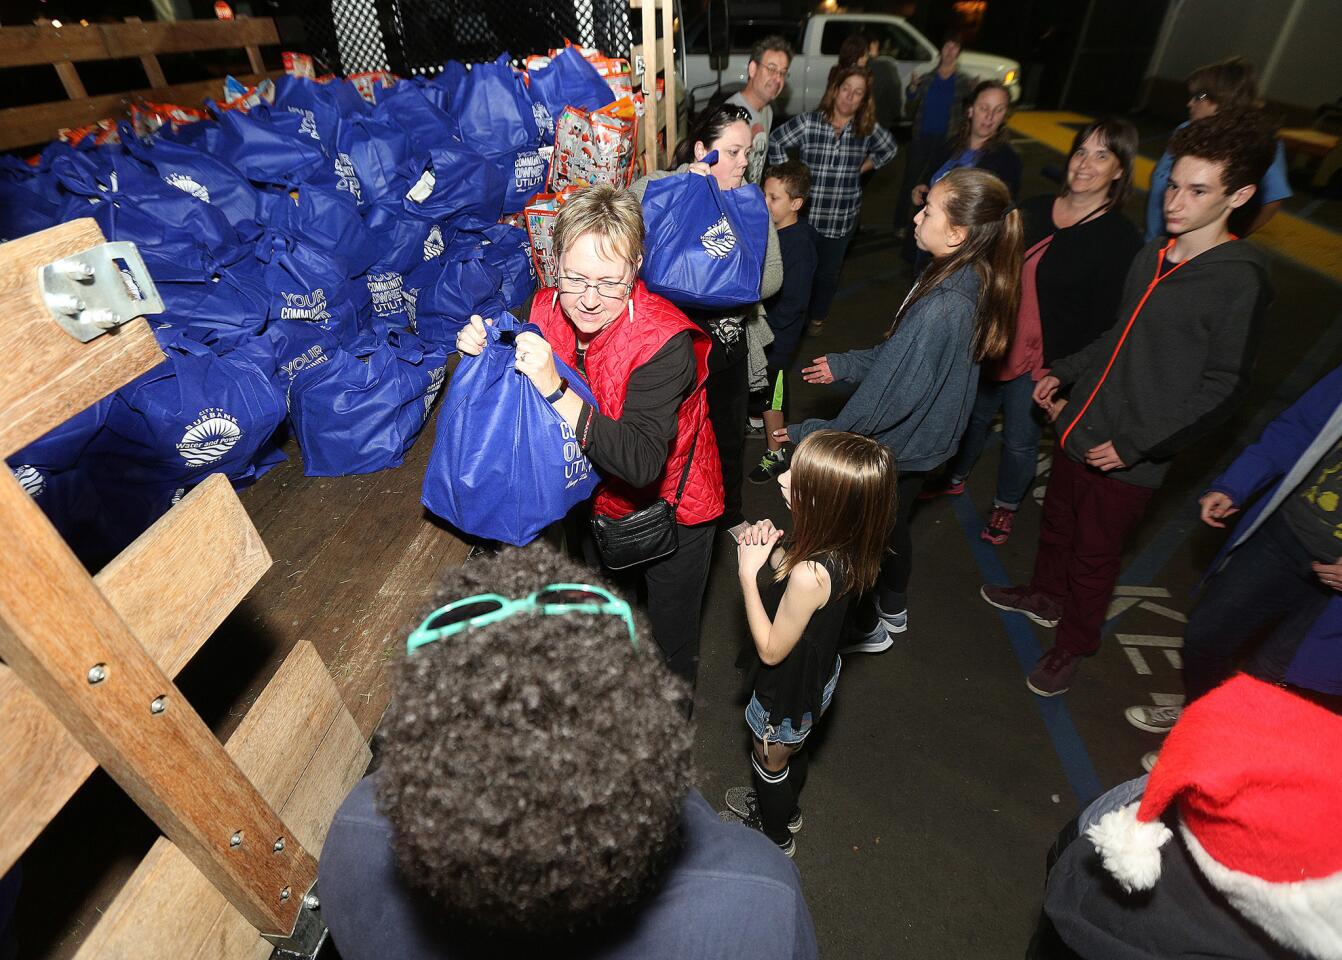 Heavy bags of food are being unloaded from a flatbed truck by dozens of volunteers at William McKinley Elementary in Burbank on Friday, December 14, 2018. Receiving donations from grocery stores, and business who conducted food drives, the Burbank Coordinating Council assembled multiple bags of food and gifts for over 500 Burbank families in need. Everything will be delivered on Saturday.